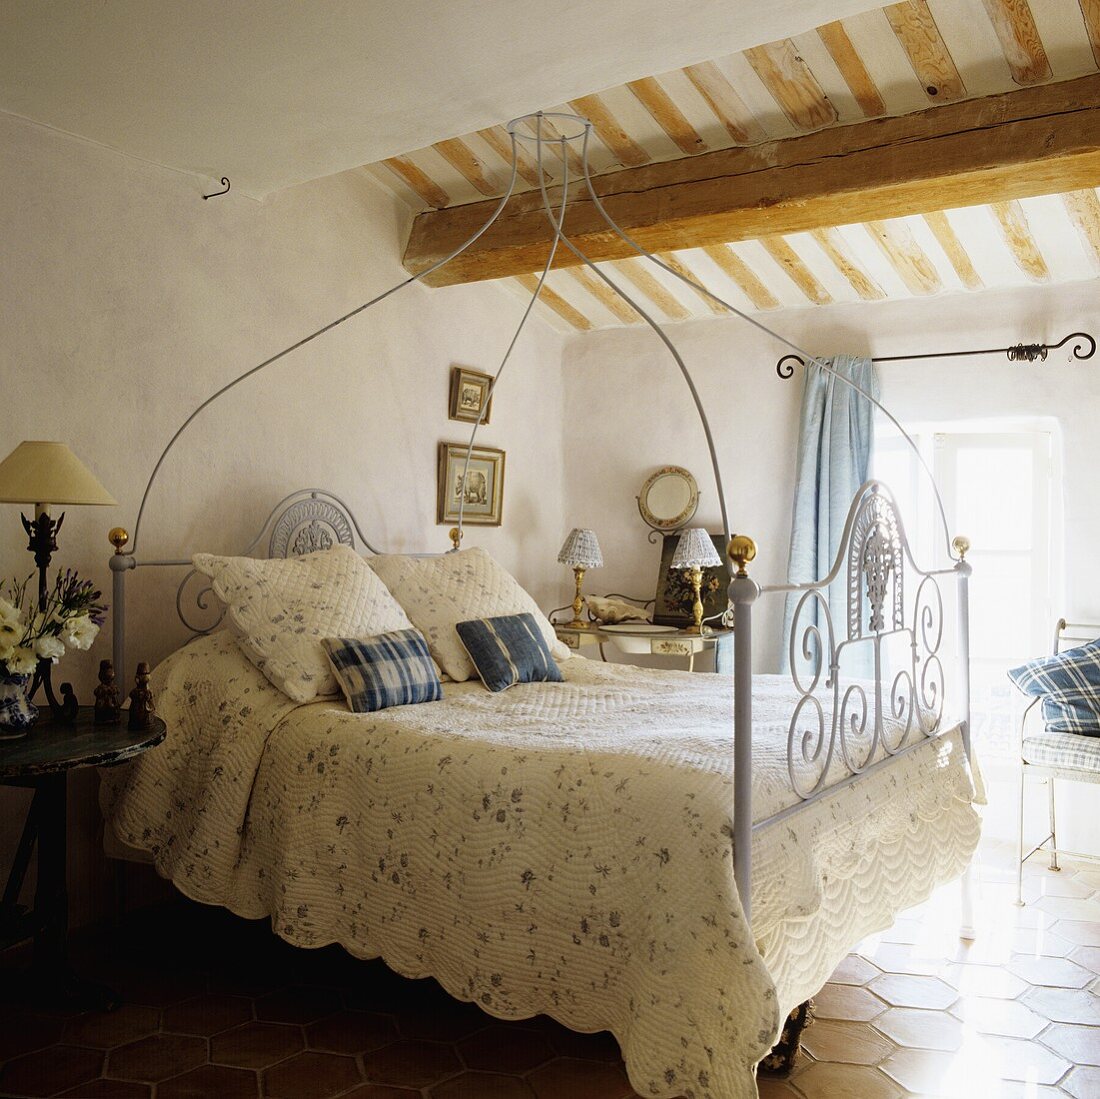 A white, antique four poster bed under and wooden beam in an attic room in a country house